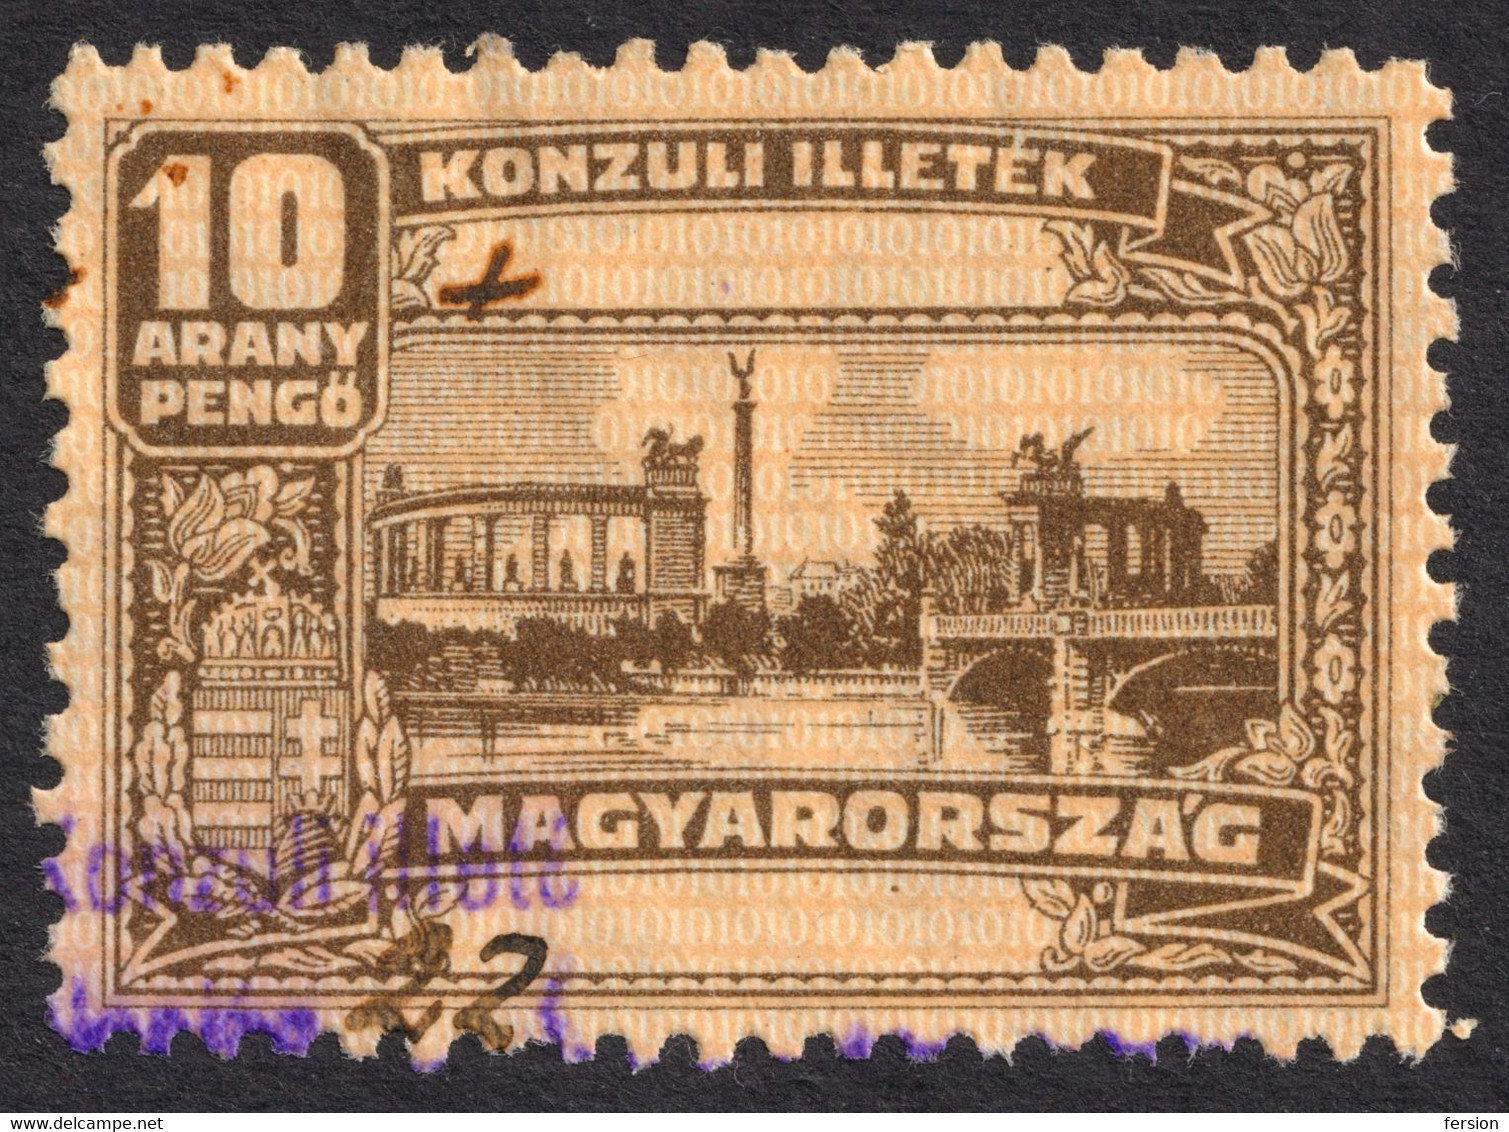 1931 - 1936 Hungary Ungarn Hongrie - Consular Revenue Tax Stamp - 10 A.P - Heroes' Square BUDAPEST Monument - Fiscaux